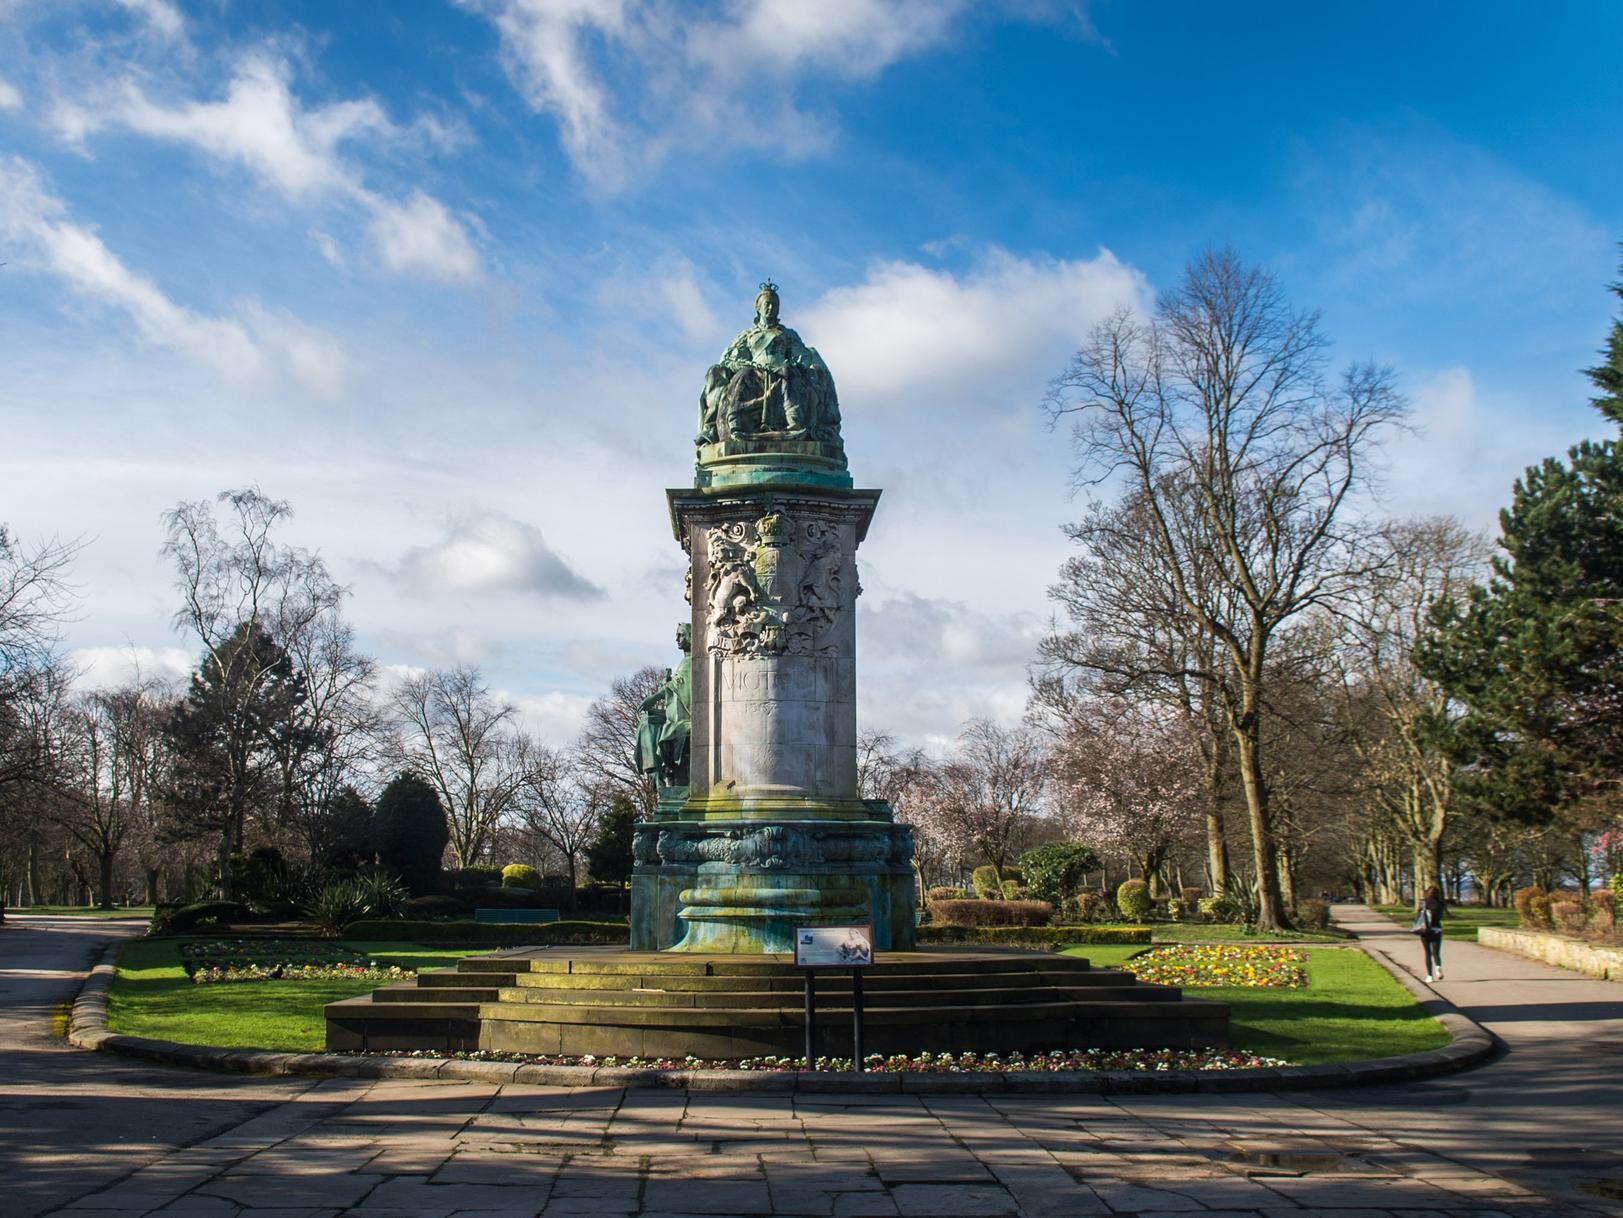 This memorial was unveiled in November 1905, and originally stood outside Leeds Town Hall. Moved to Woodhouse Moor in 1937 and was designated as a Grade II* listed building in August 1976.